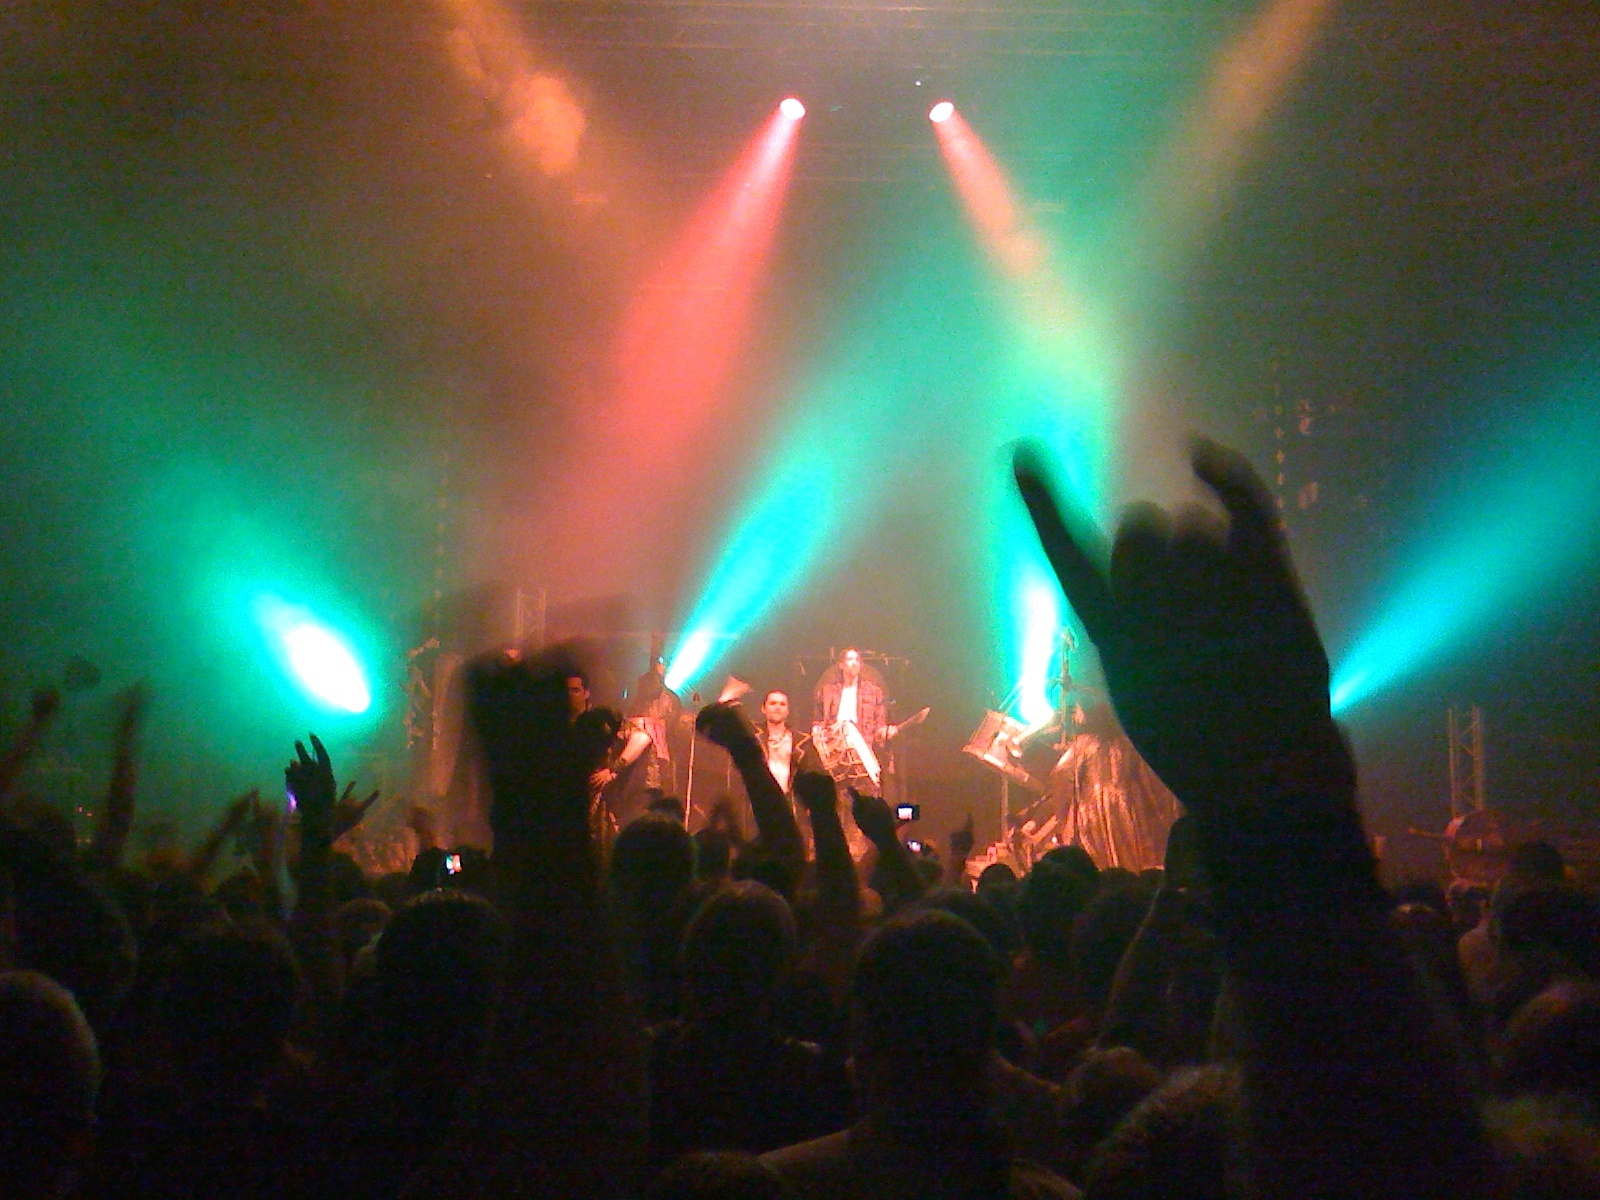 a concert on stage with many hands up in the air